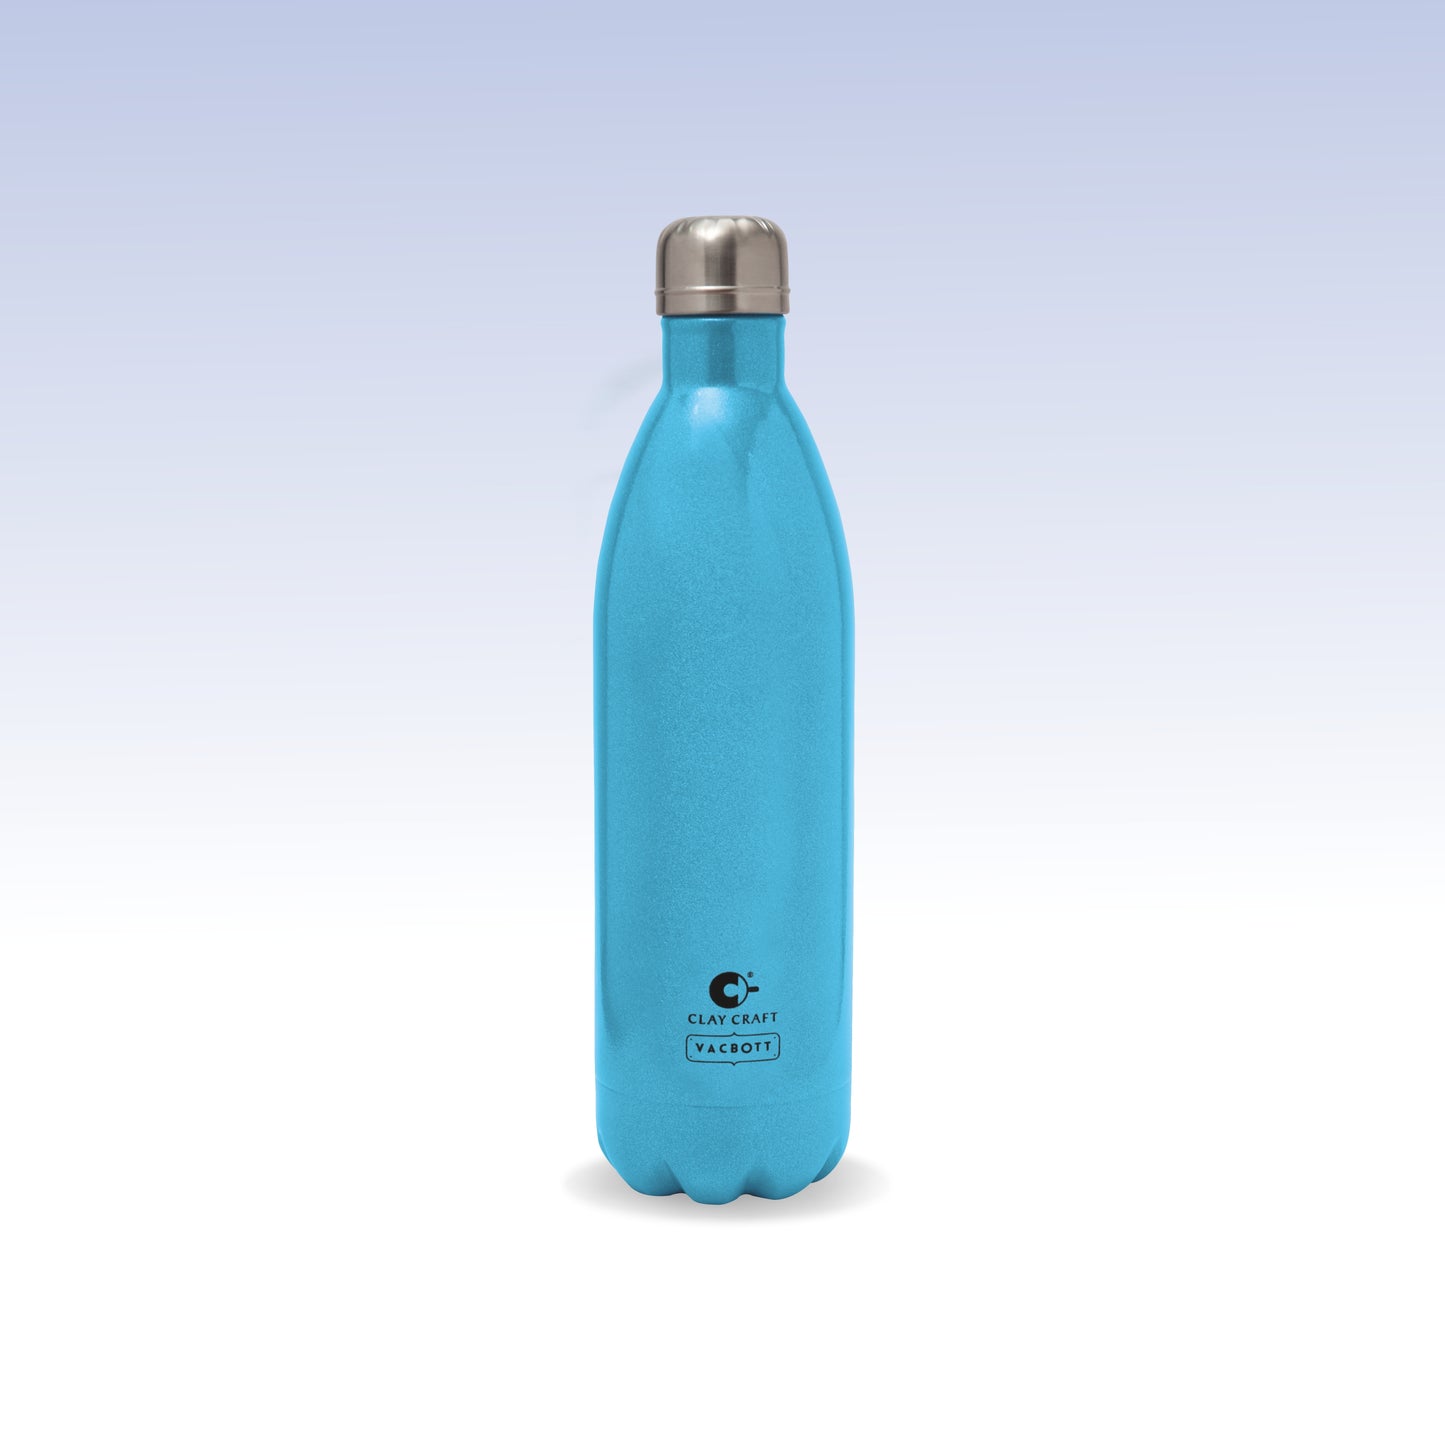 Vacbott Vaccum Bottle, Stark Sparkle Double Walled 24 Hours Hot and Cold Water Bottle